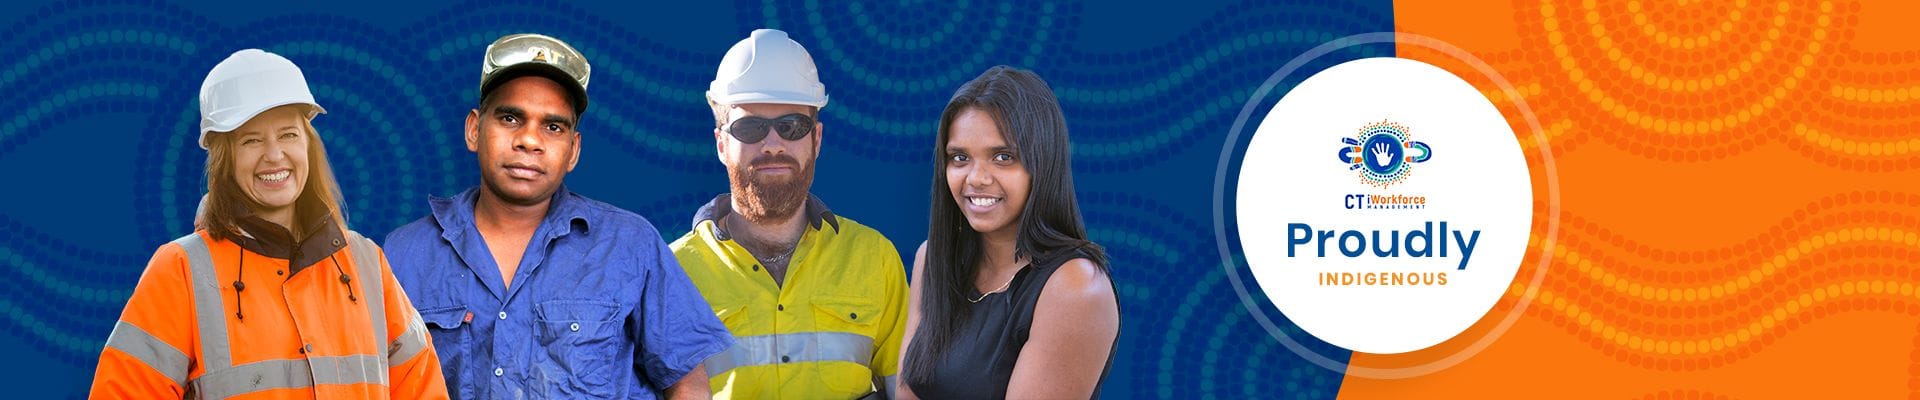 Labour Hire & Temporary Workers | CT iWorkforce Management